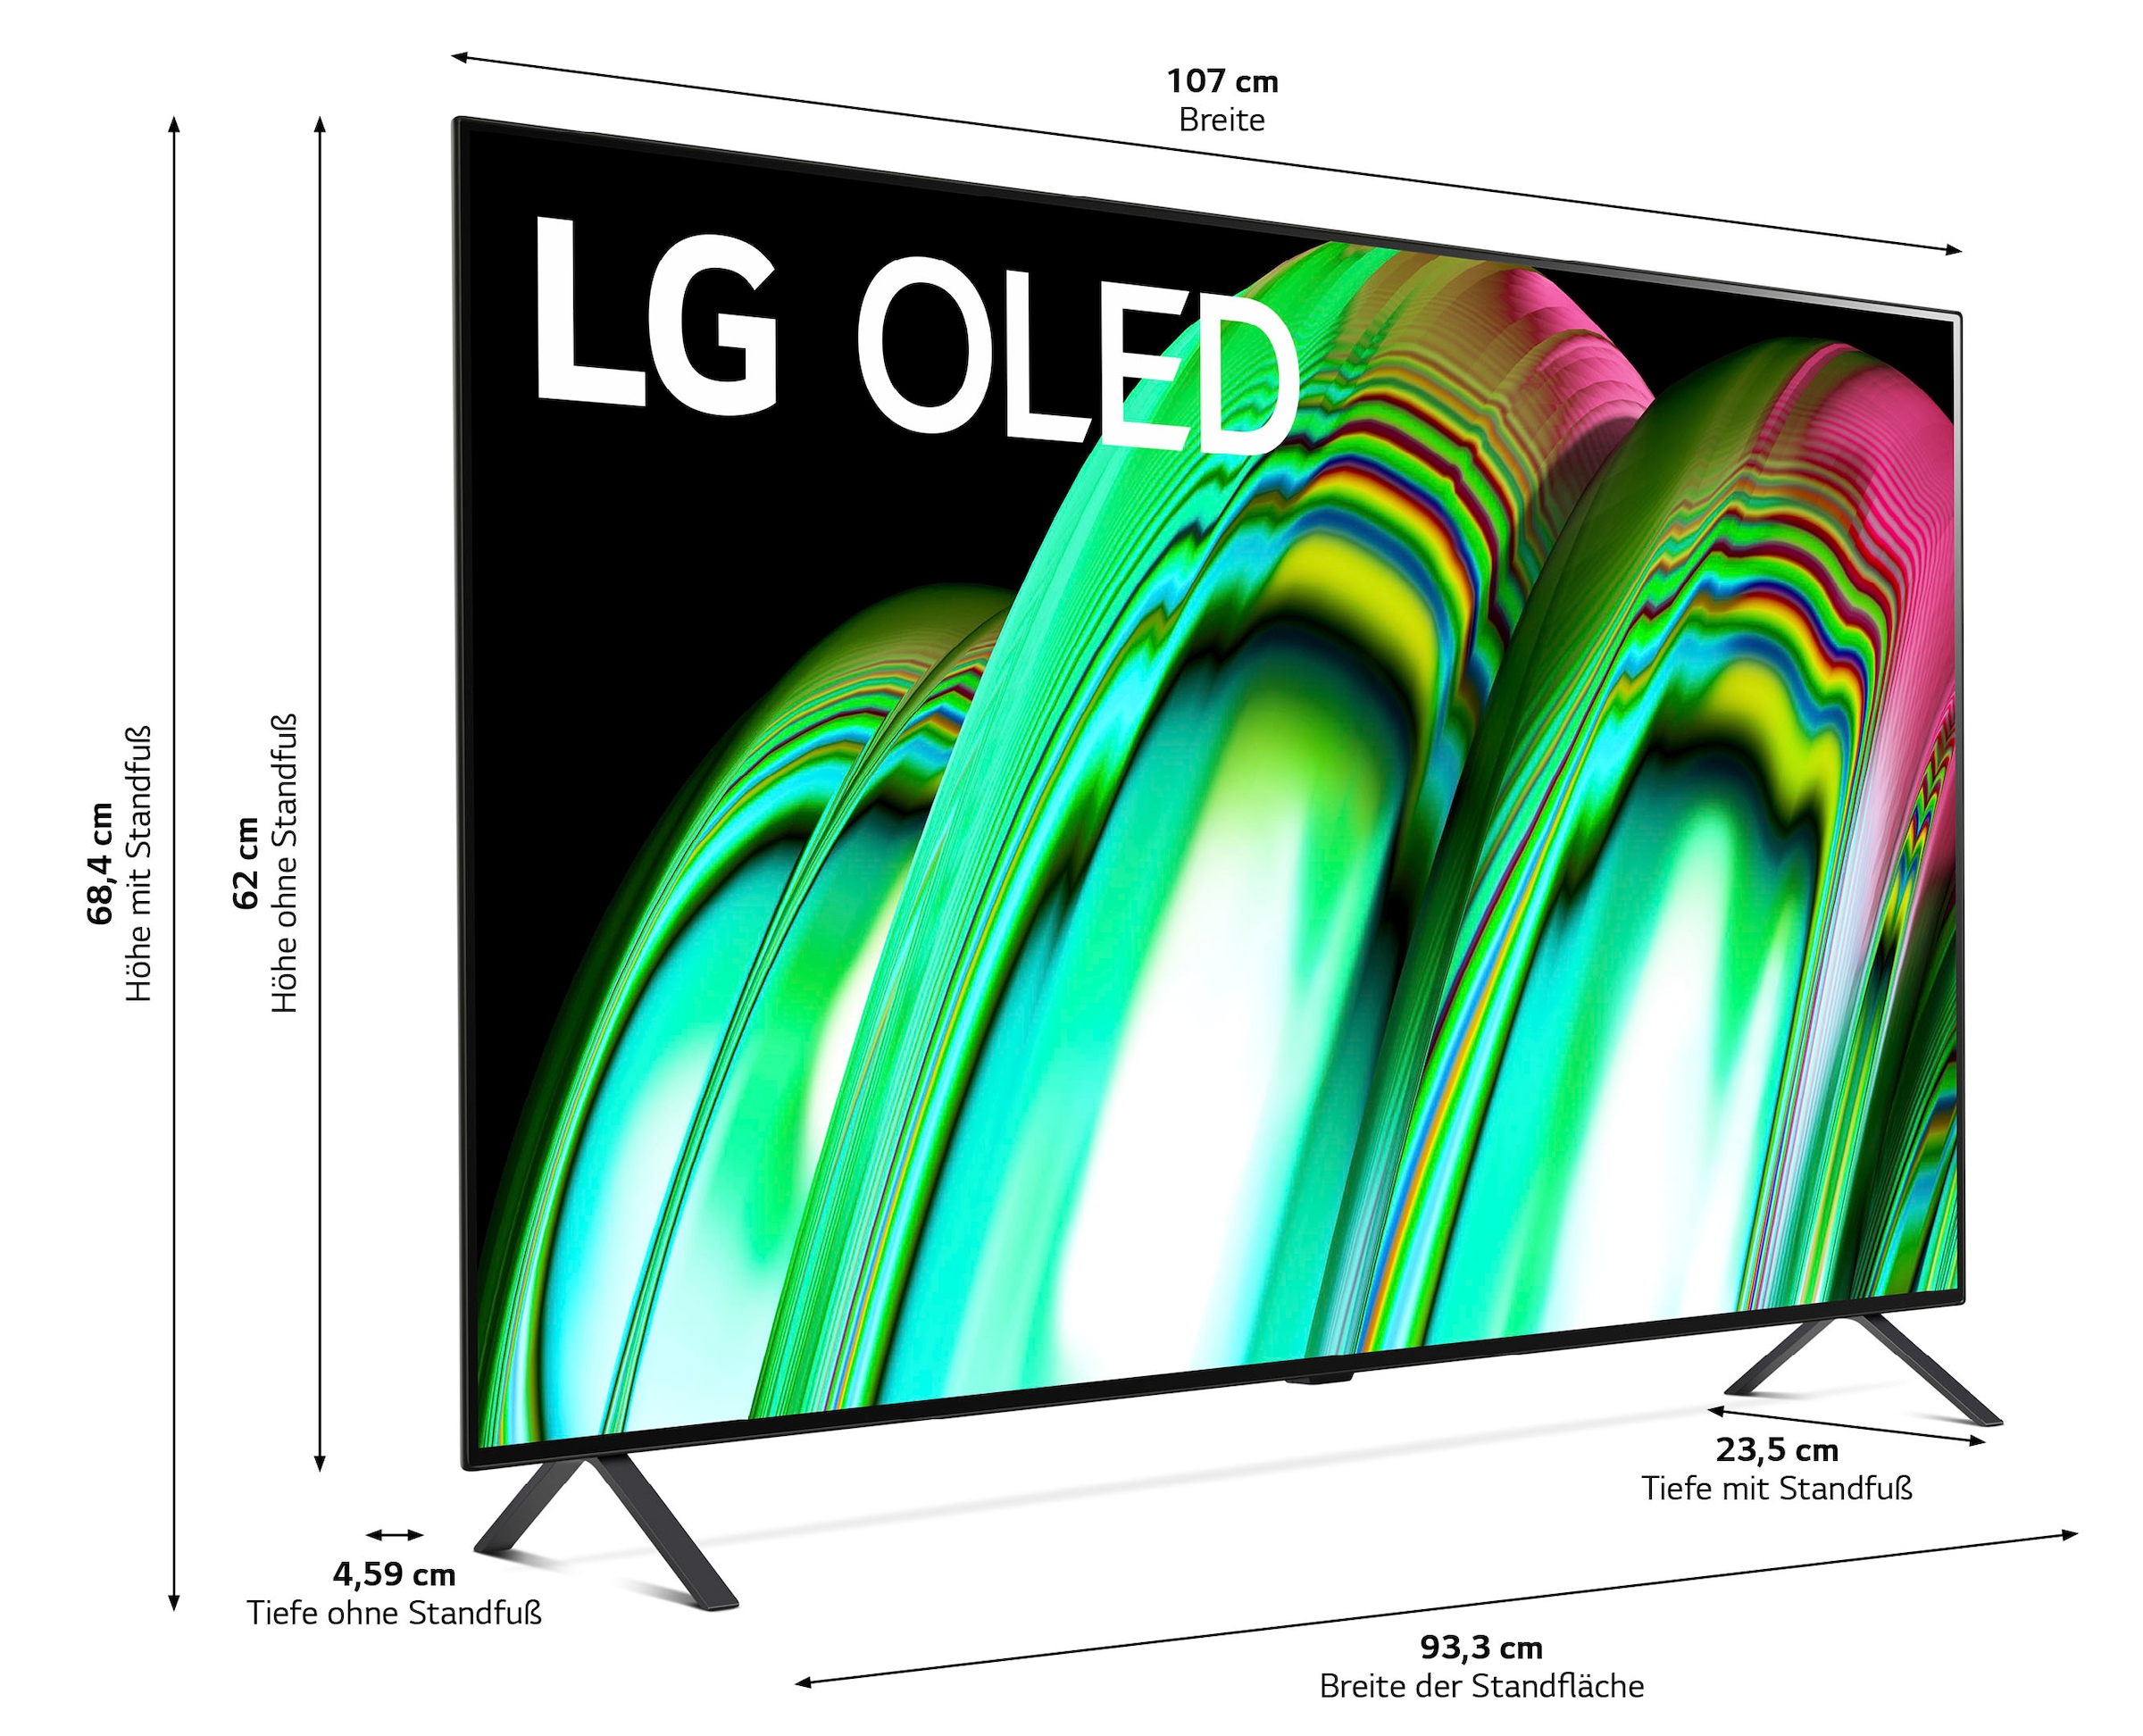 Triple AI-Prozessor,Dolby 4K jetzt Tuner LG bei Ultra Gen5 & Smart-TV, OLED,α7 »OLED48A29LA«, HD, Atmos,Single 121 cm/48 OTTO OLED-Fernseher Vision Zoll, 4K